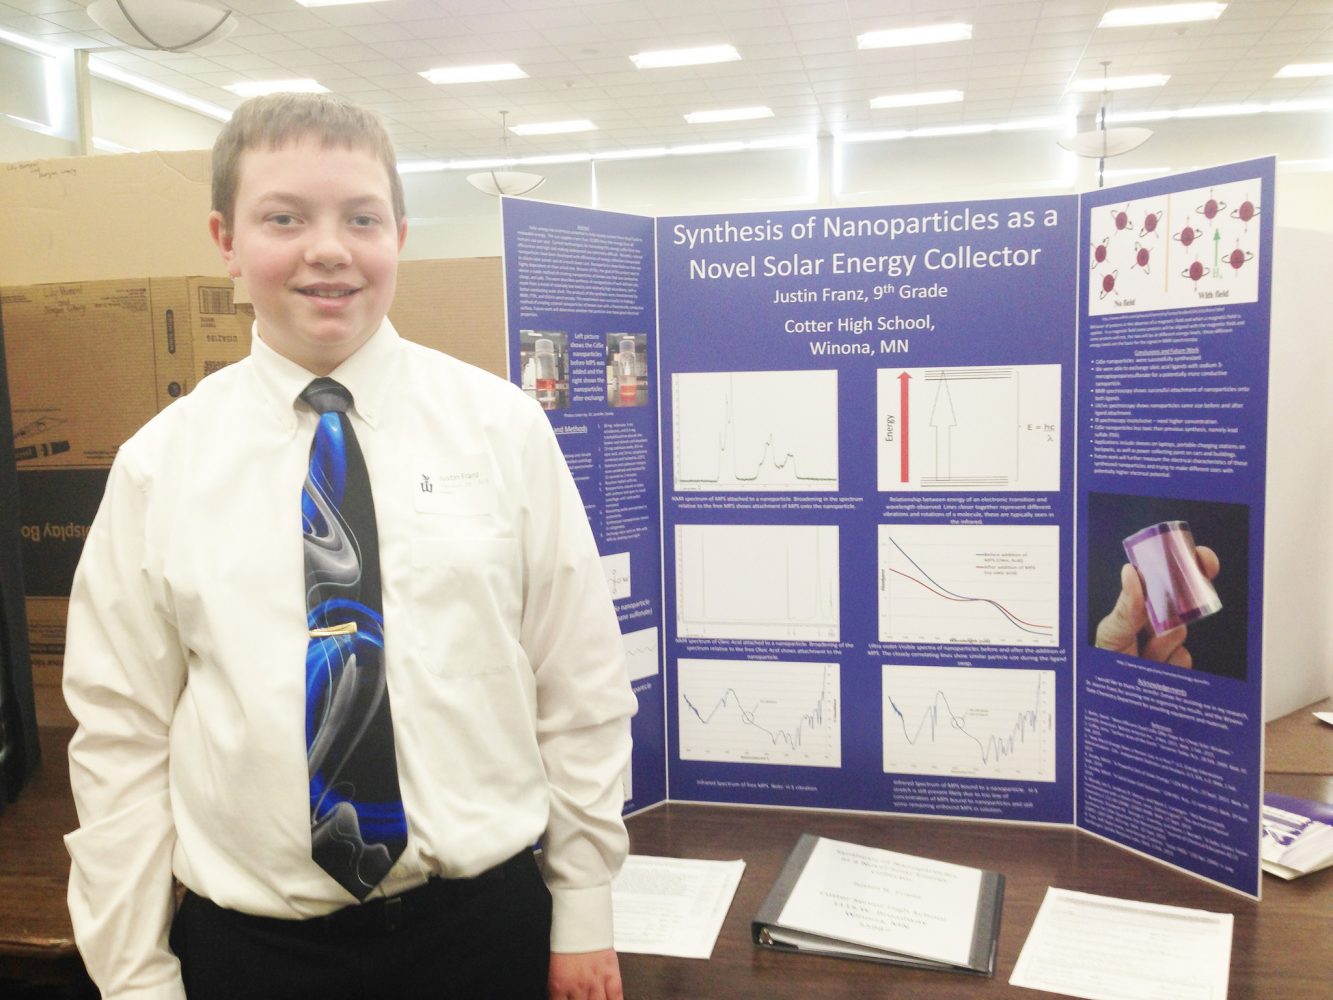 Justin Franz, a 9th grade student from Cotter High School, presents his science project at Winona State University. Photo: Emily Dean